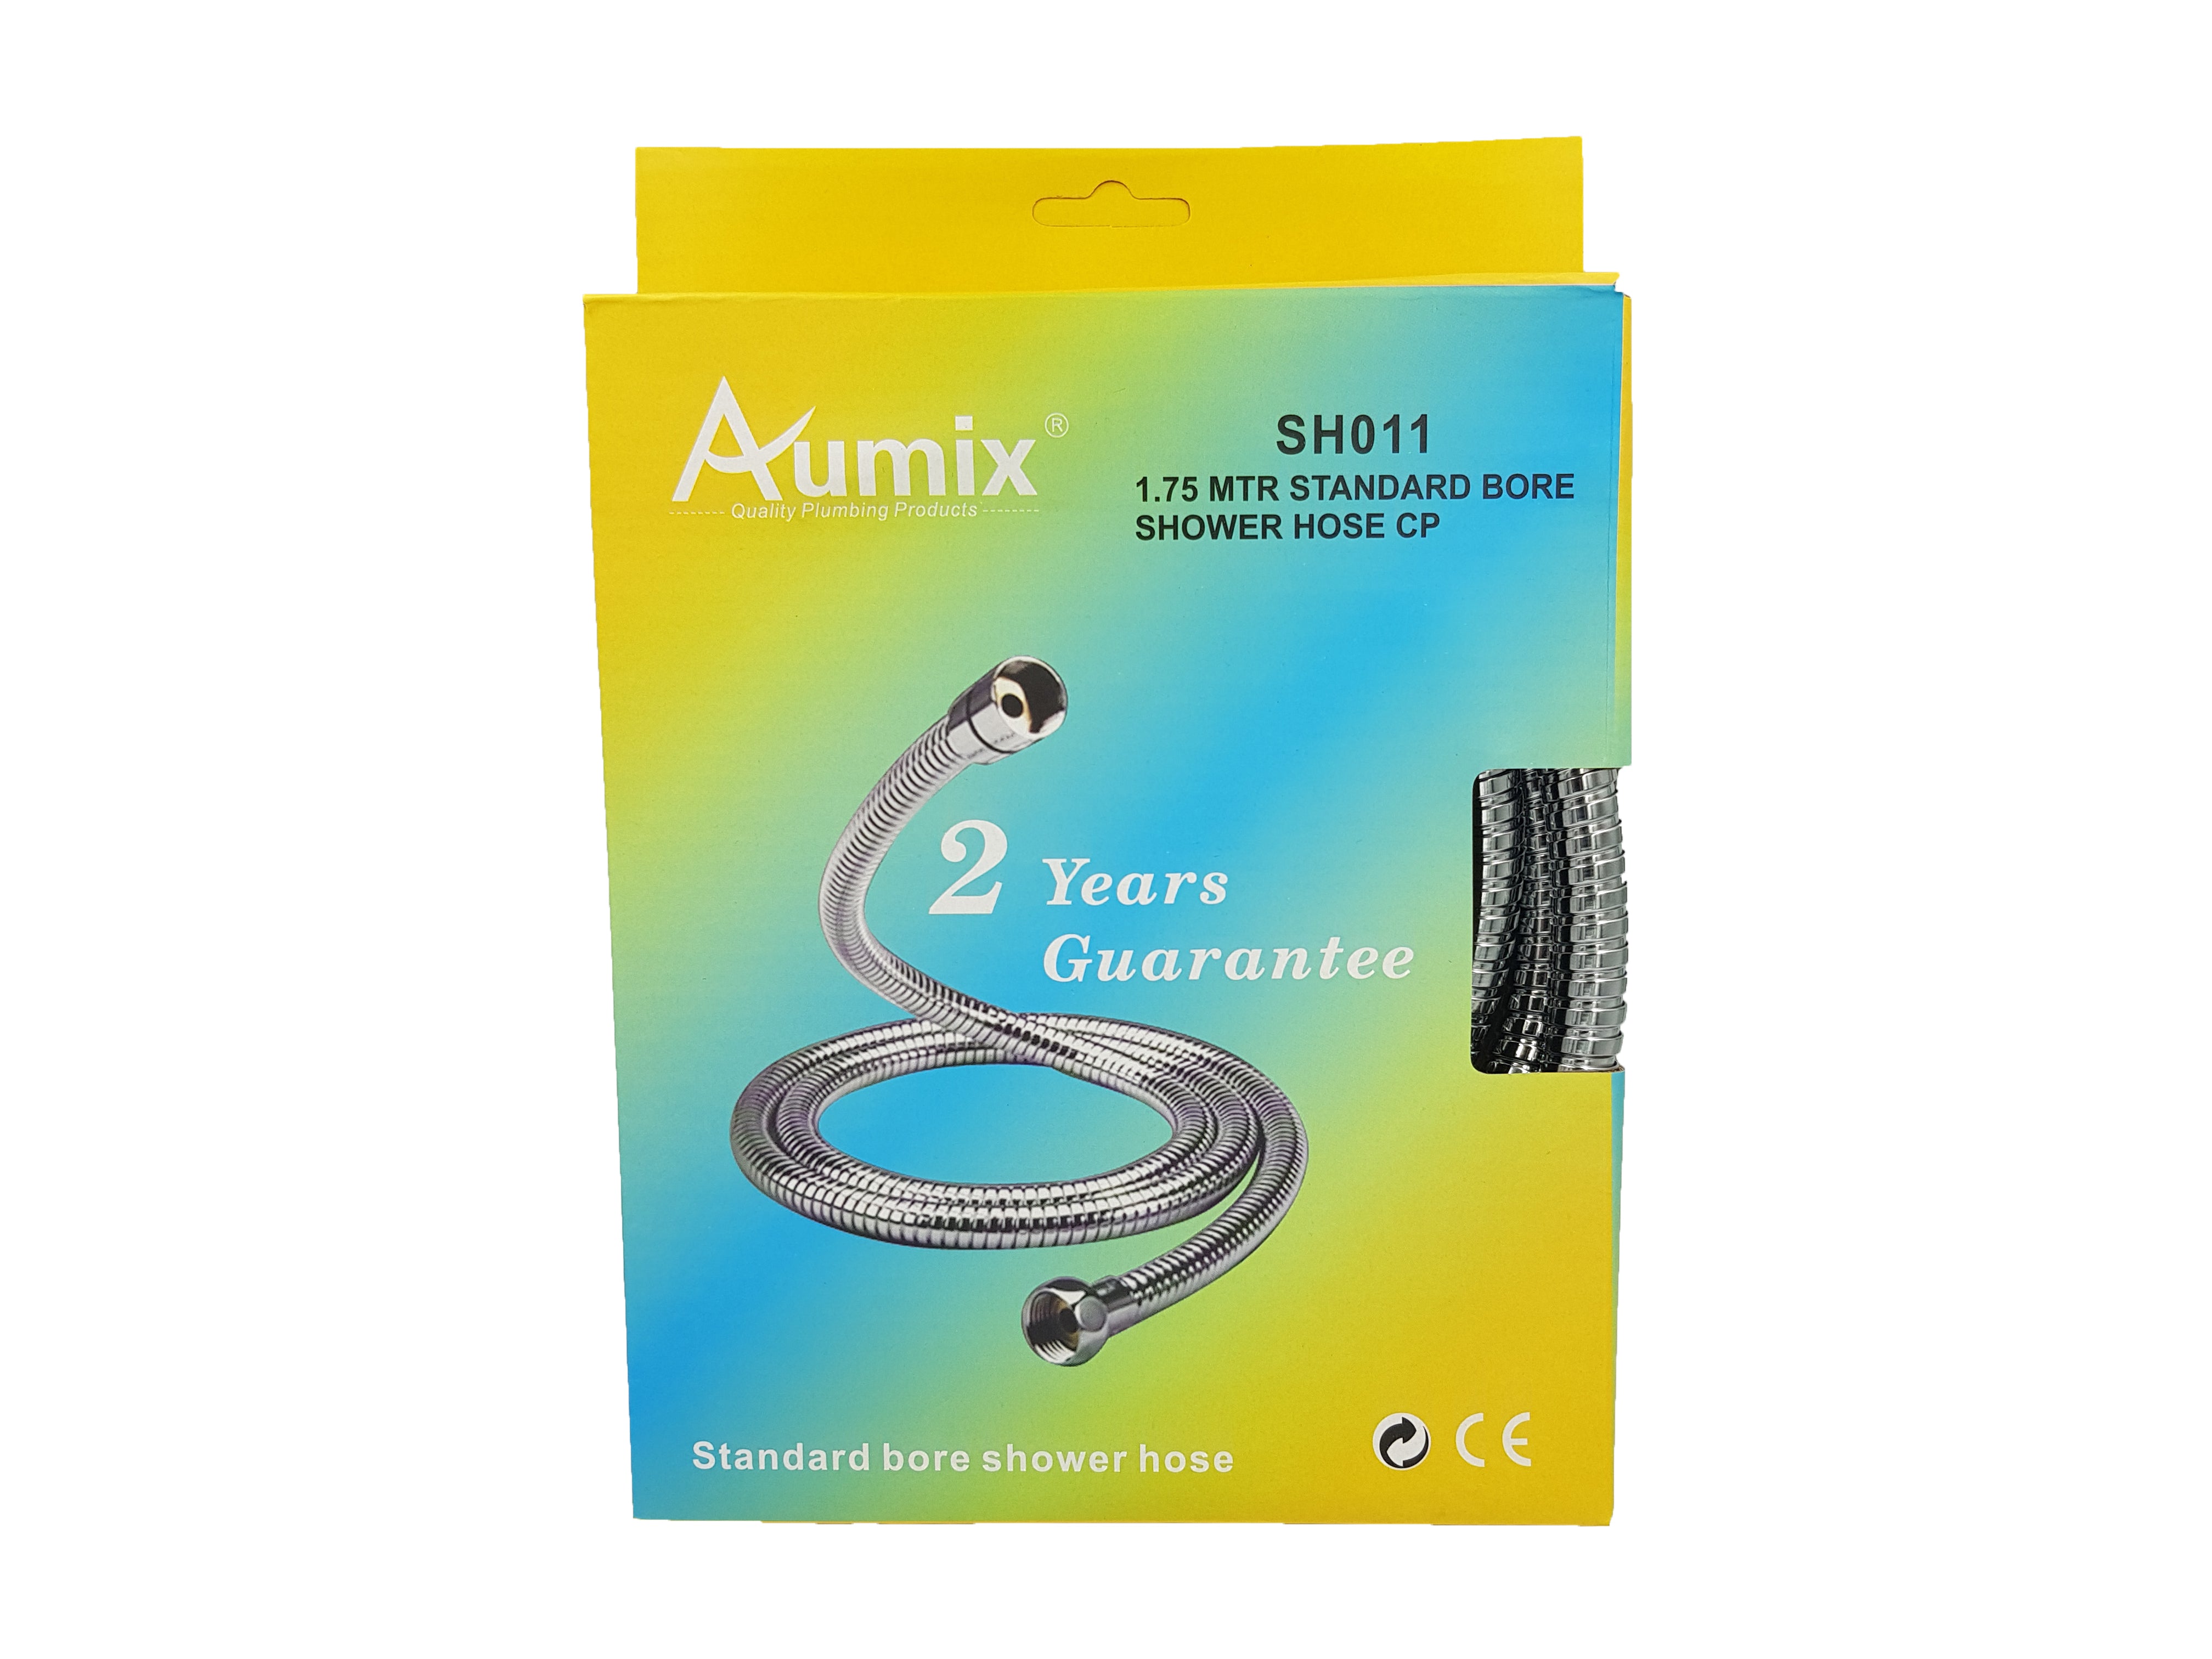 Aumix 1.75 Metres Long Replacement Shower Hose Standard Bore Stainless Steel Anti-Kink Double Lock Chrome Plated